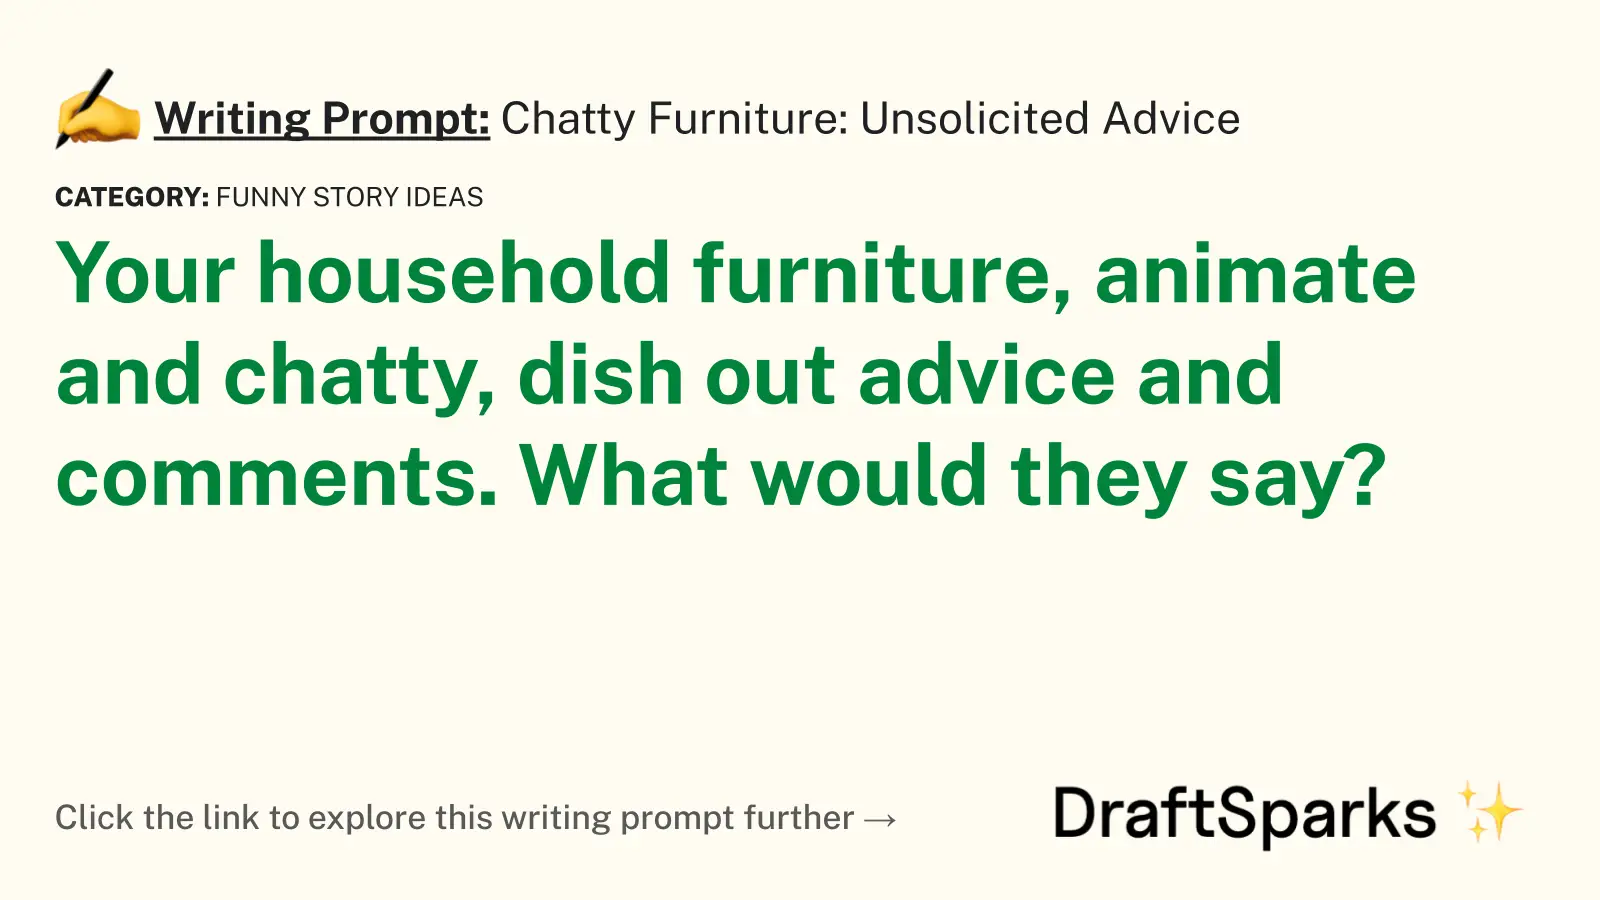 Chatty Furniture: Unsolicited Advice